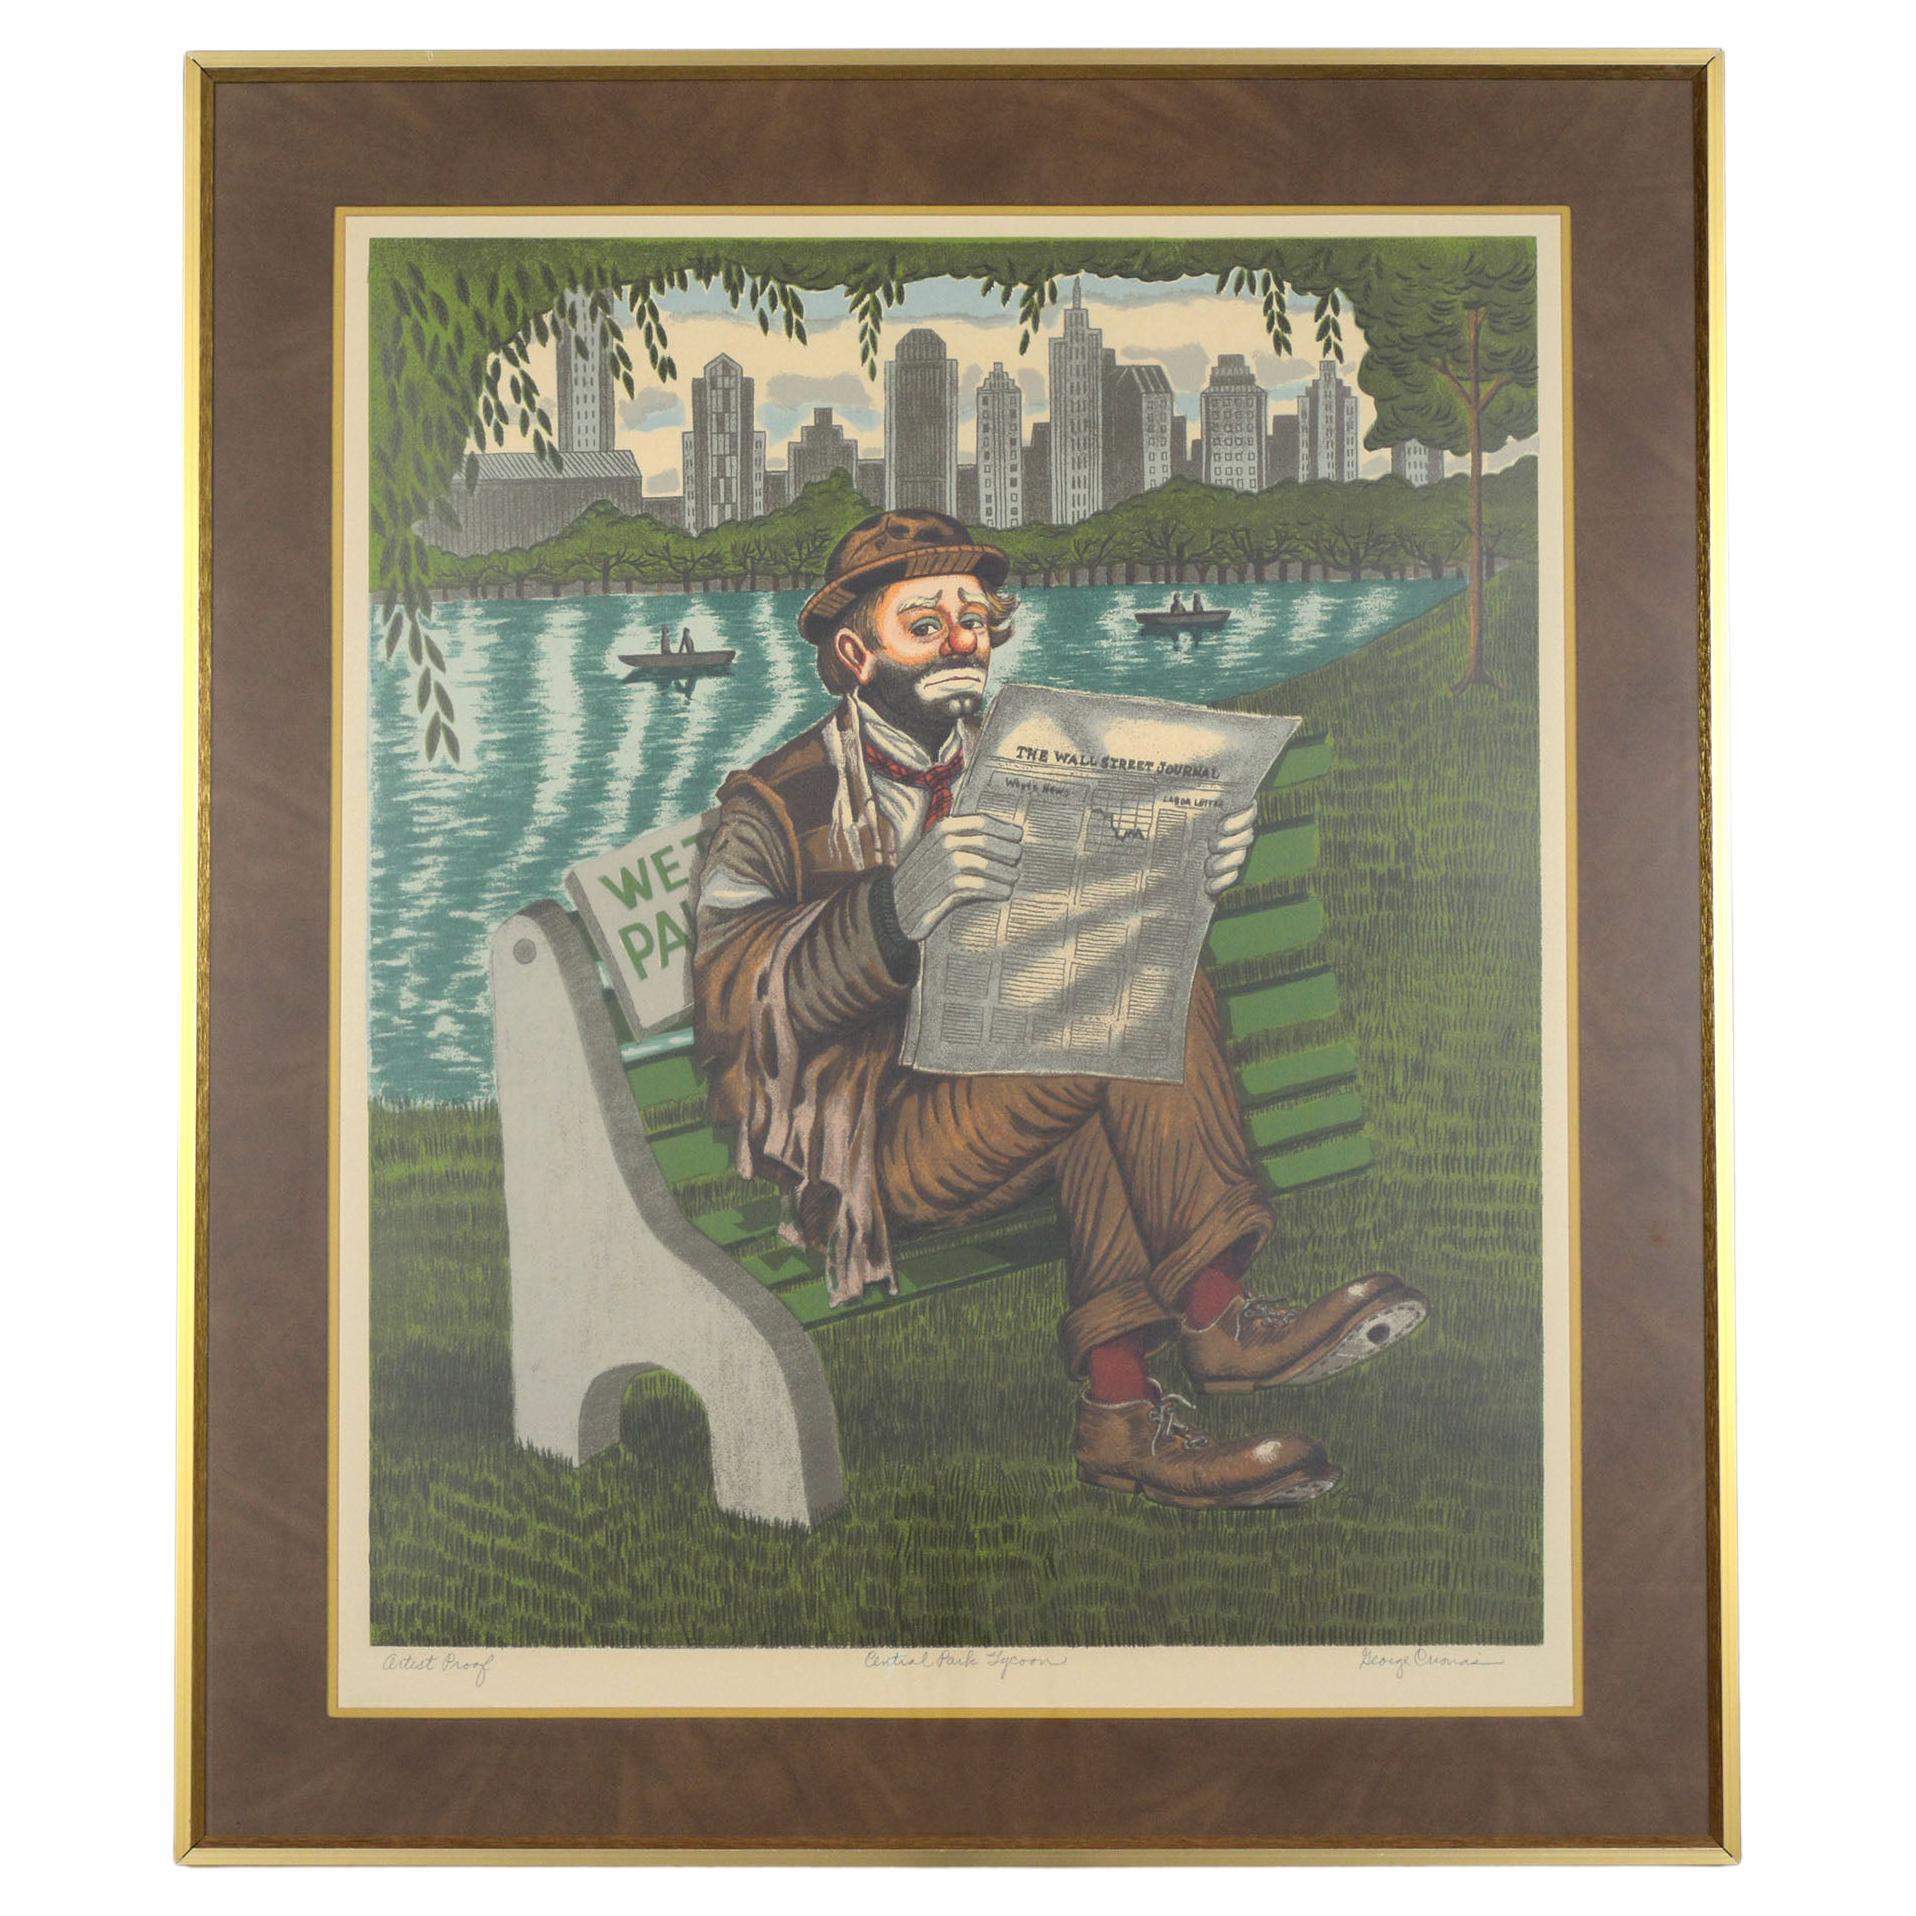 George Crionas' "Central Park Tycoon" Lithograph For Sale